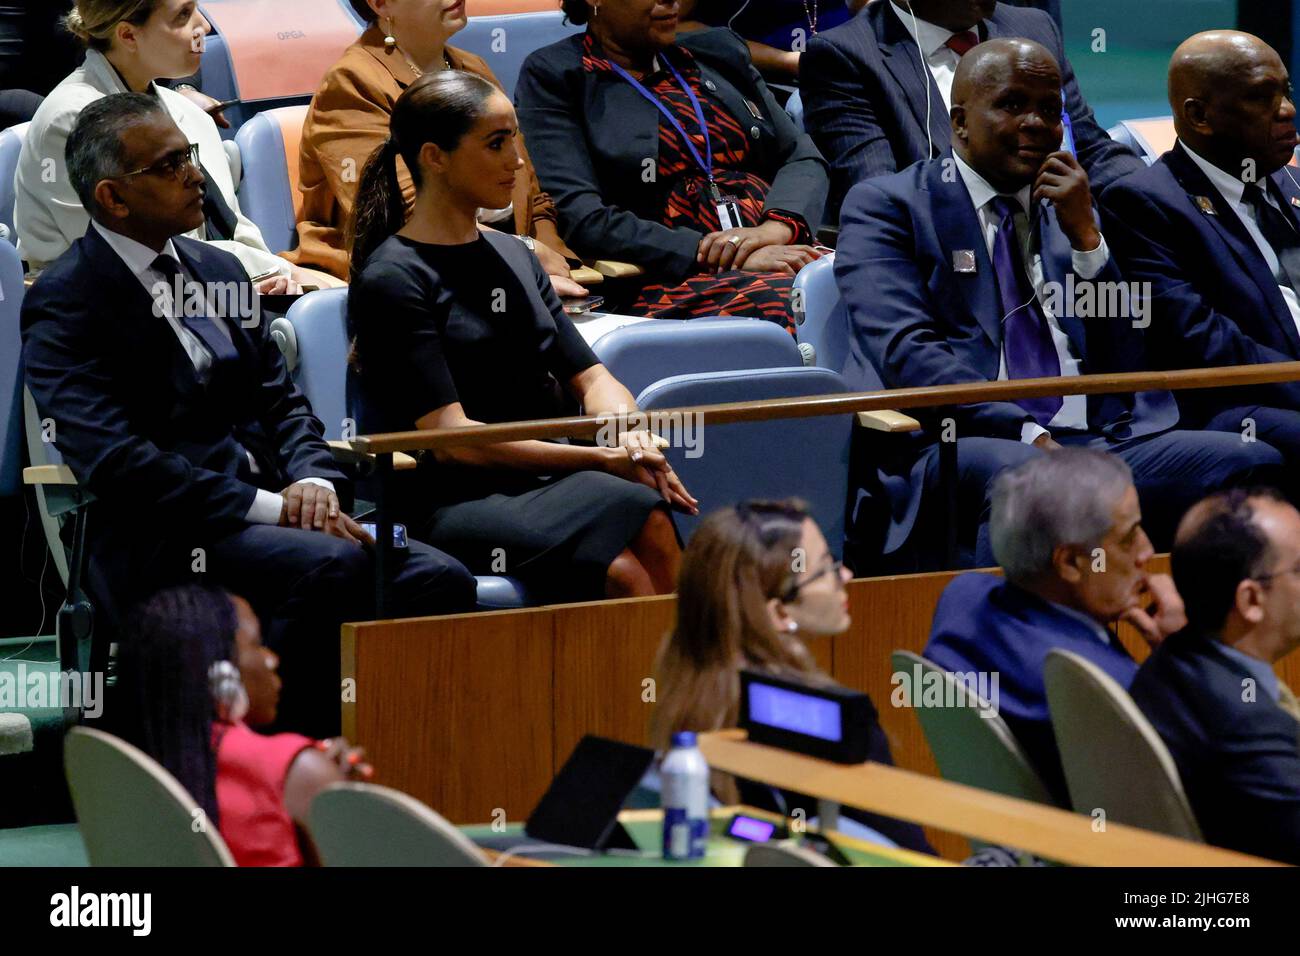 Britain's Meghan, Duchess of Sussex, attends the United Nations General Assembly celebration of Nelson Mandela International Day, while her husband, Britain's Prince Harry delivers an address, at the United Nations Headquarters in New York, U.S., July 18, 2022. REUTERS/Eduardo Munoz Stock Photo